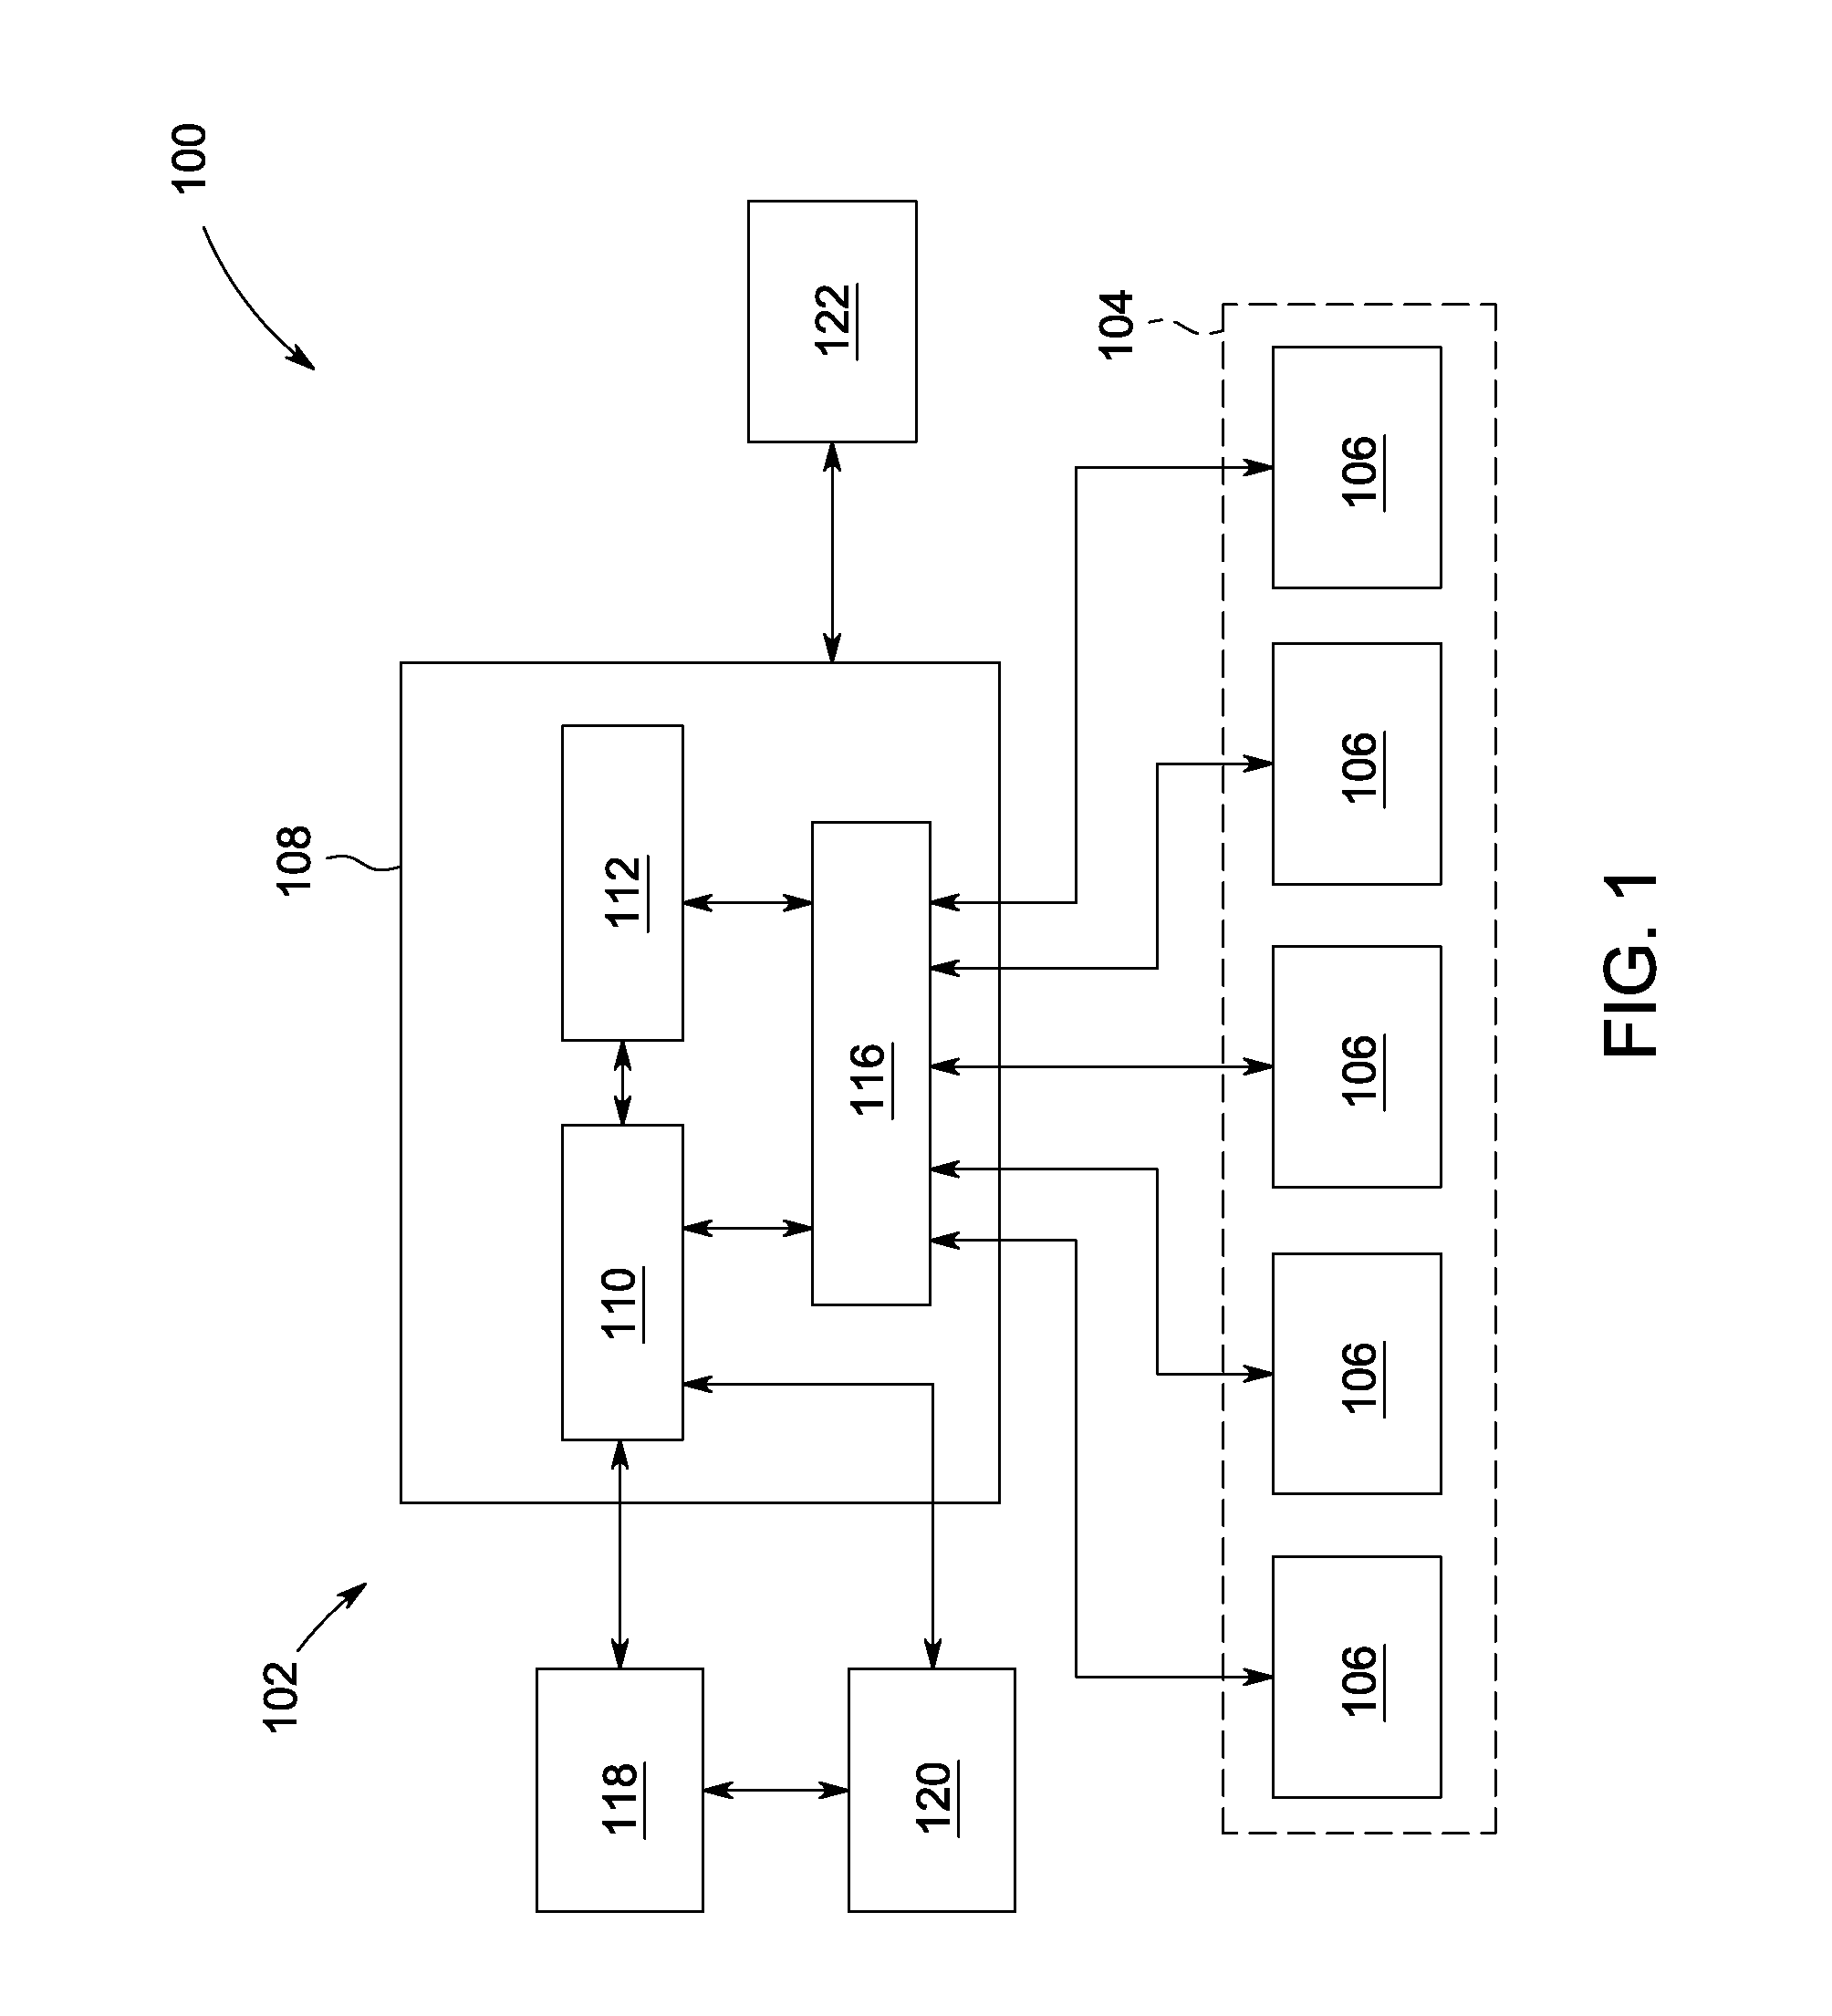 Shared memory architecture for protection of electrical distribution equipment